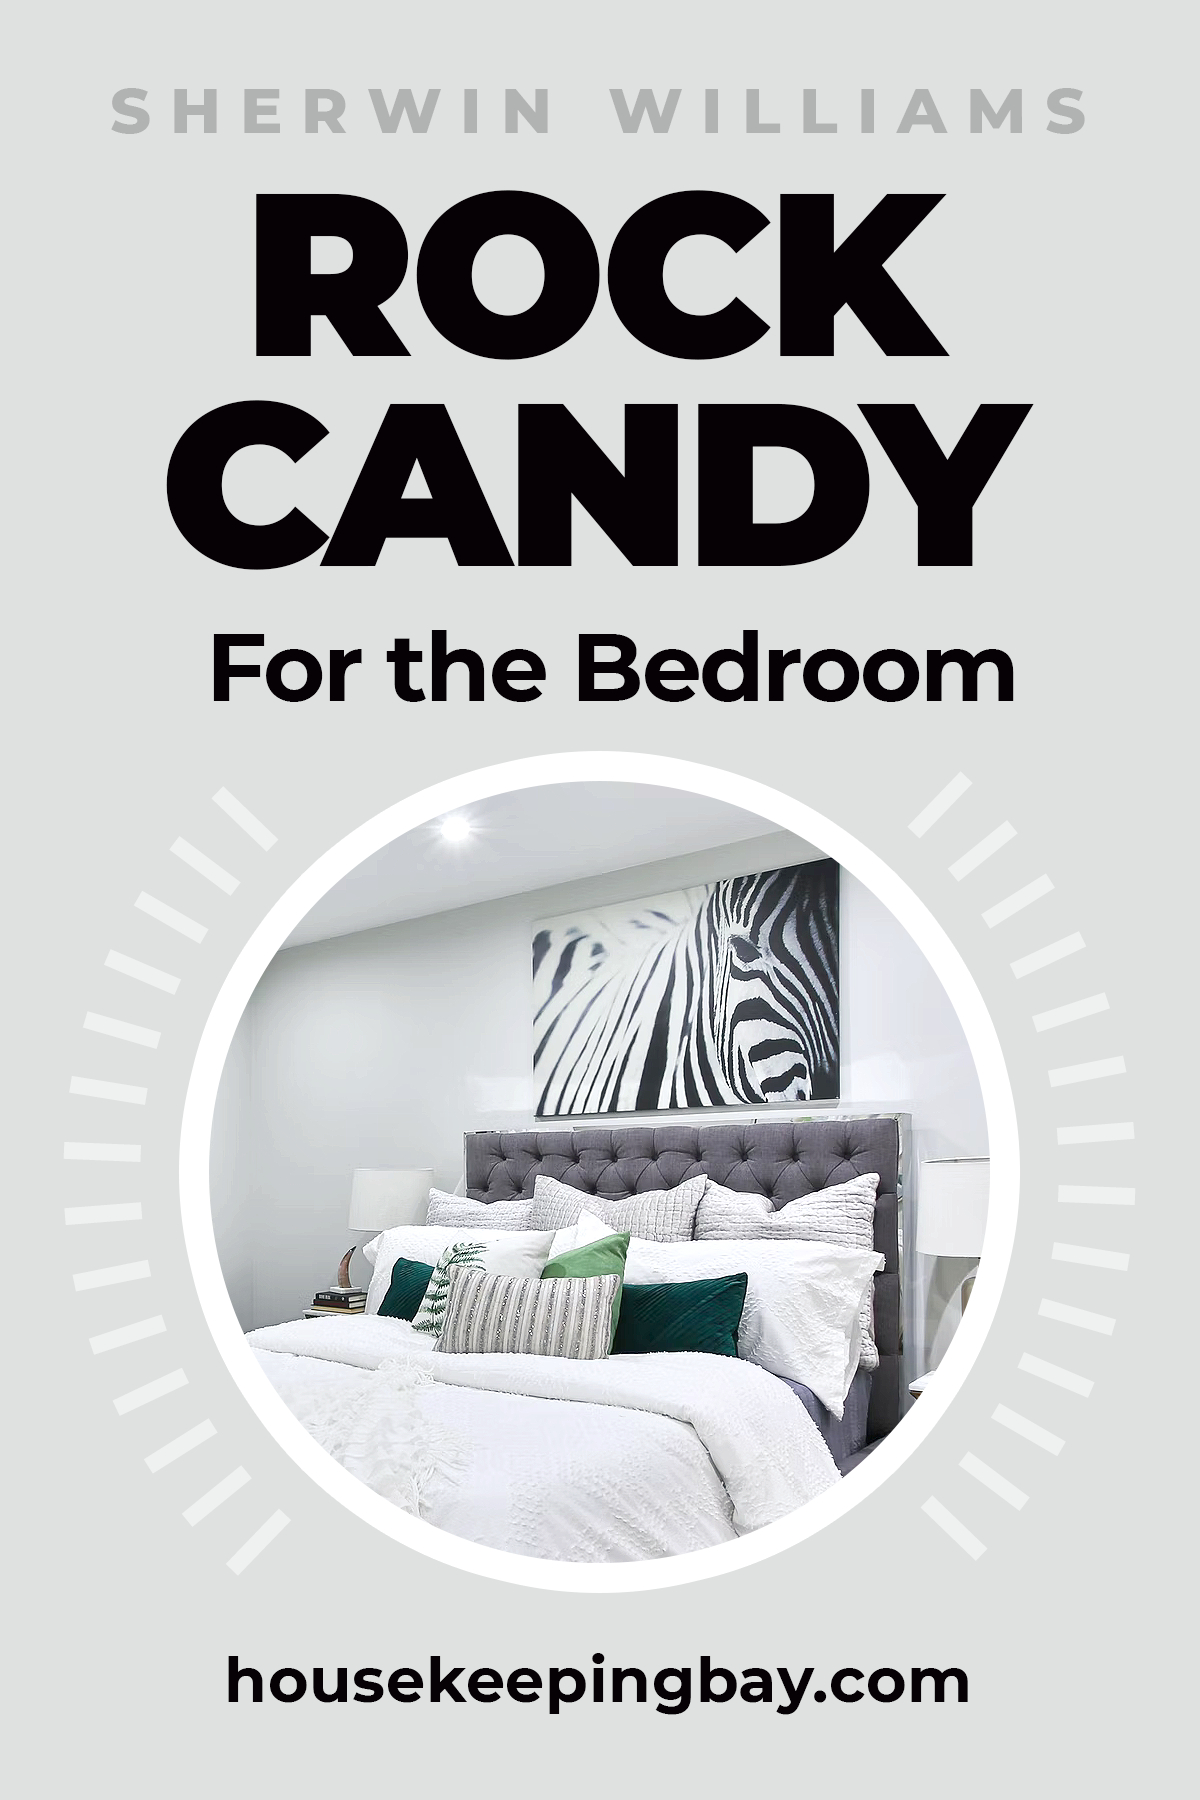 Rock Candy For the Bedroom